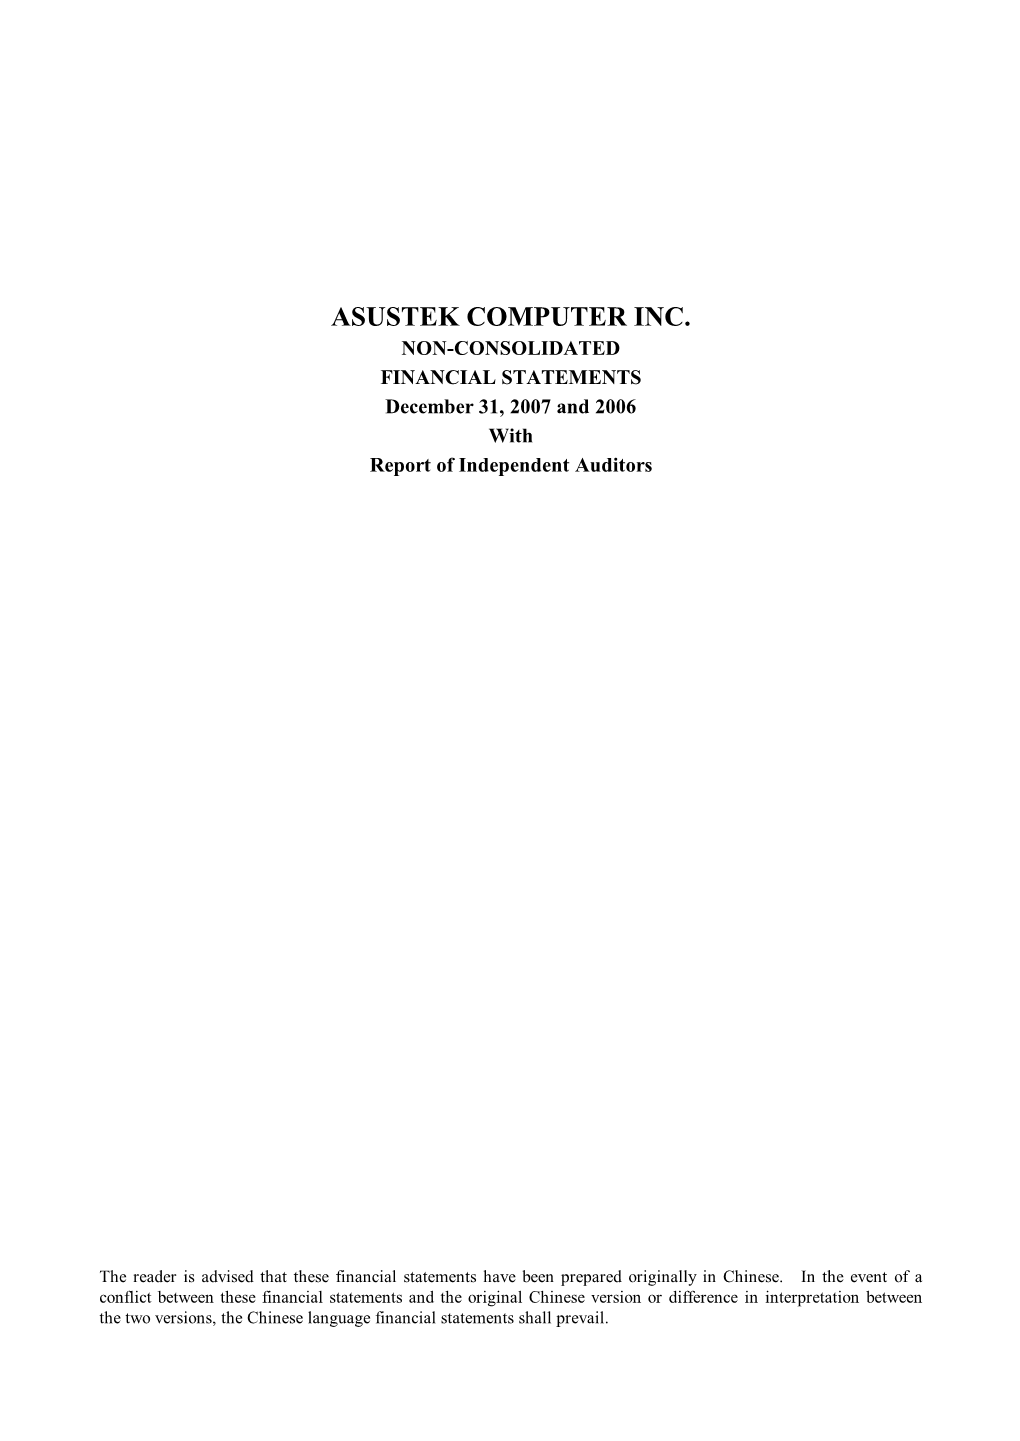 ASUSTEK COMPUTER INC. NON-CONSOLIDATED FINANCIAL STATEMENTS December 31, 2007 and 2006 with Report of Independent Auditors